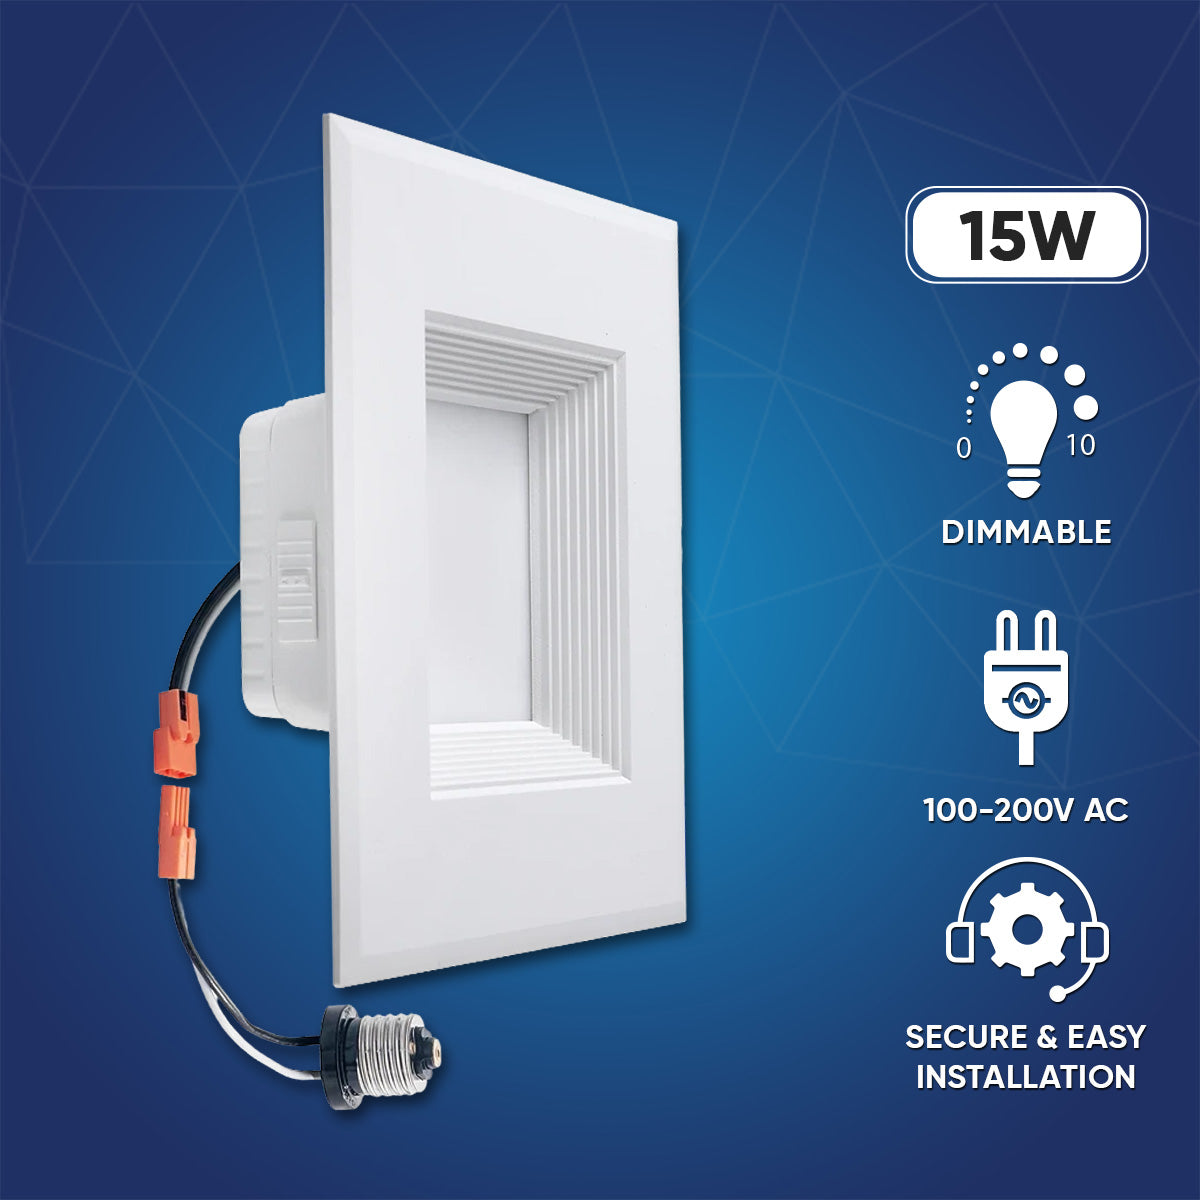 6" Square LED Downlight- Feature